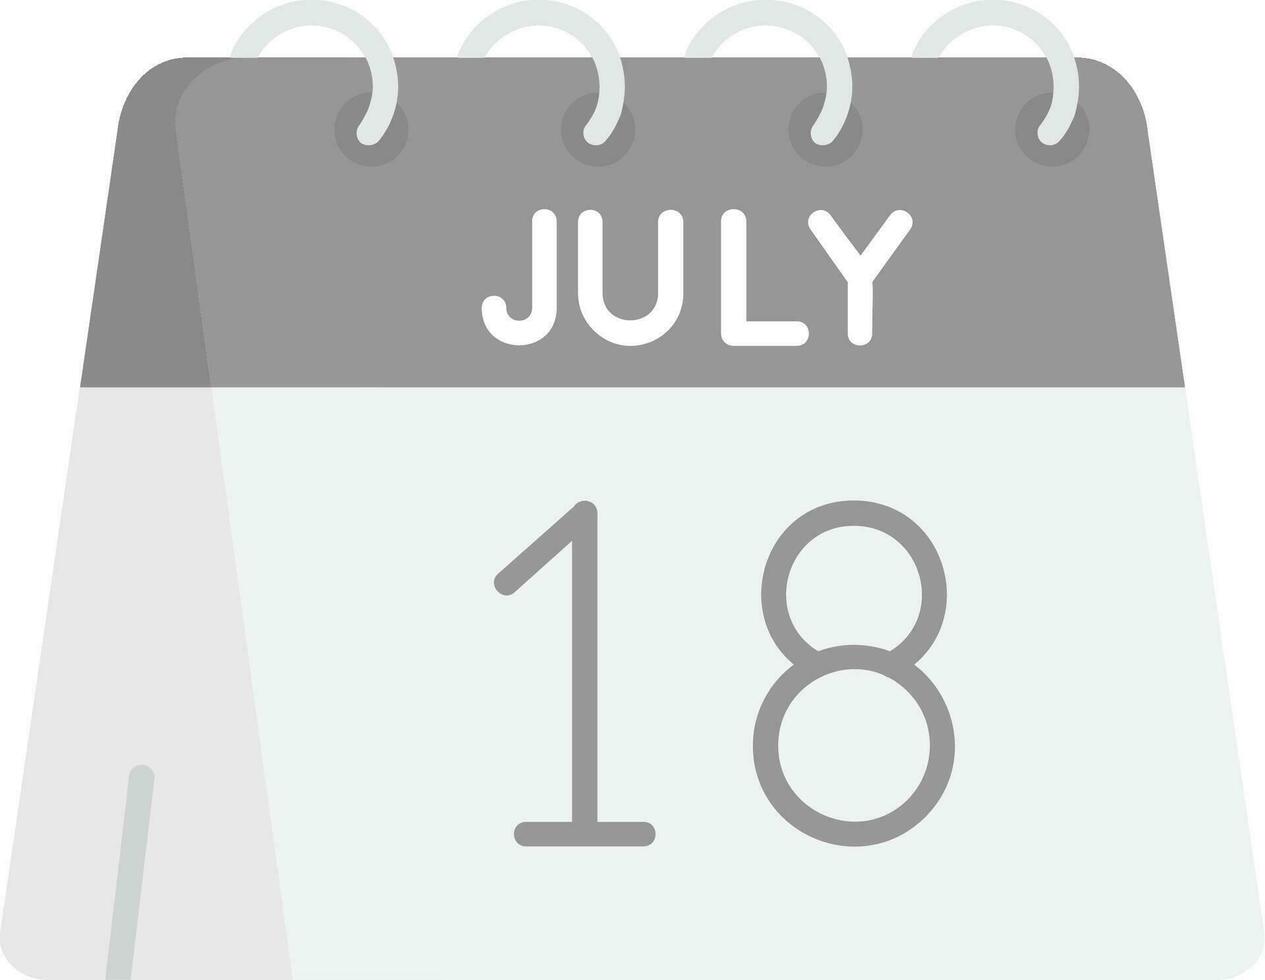 18th of July Grey scale Icon vector